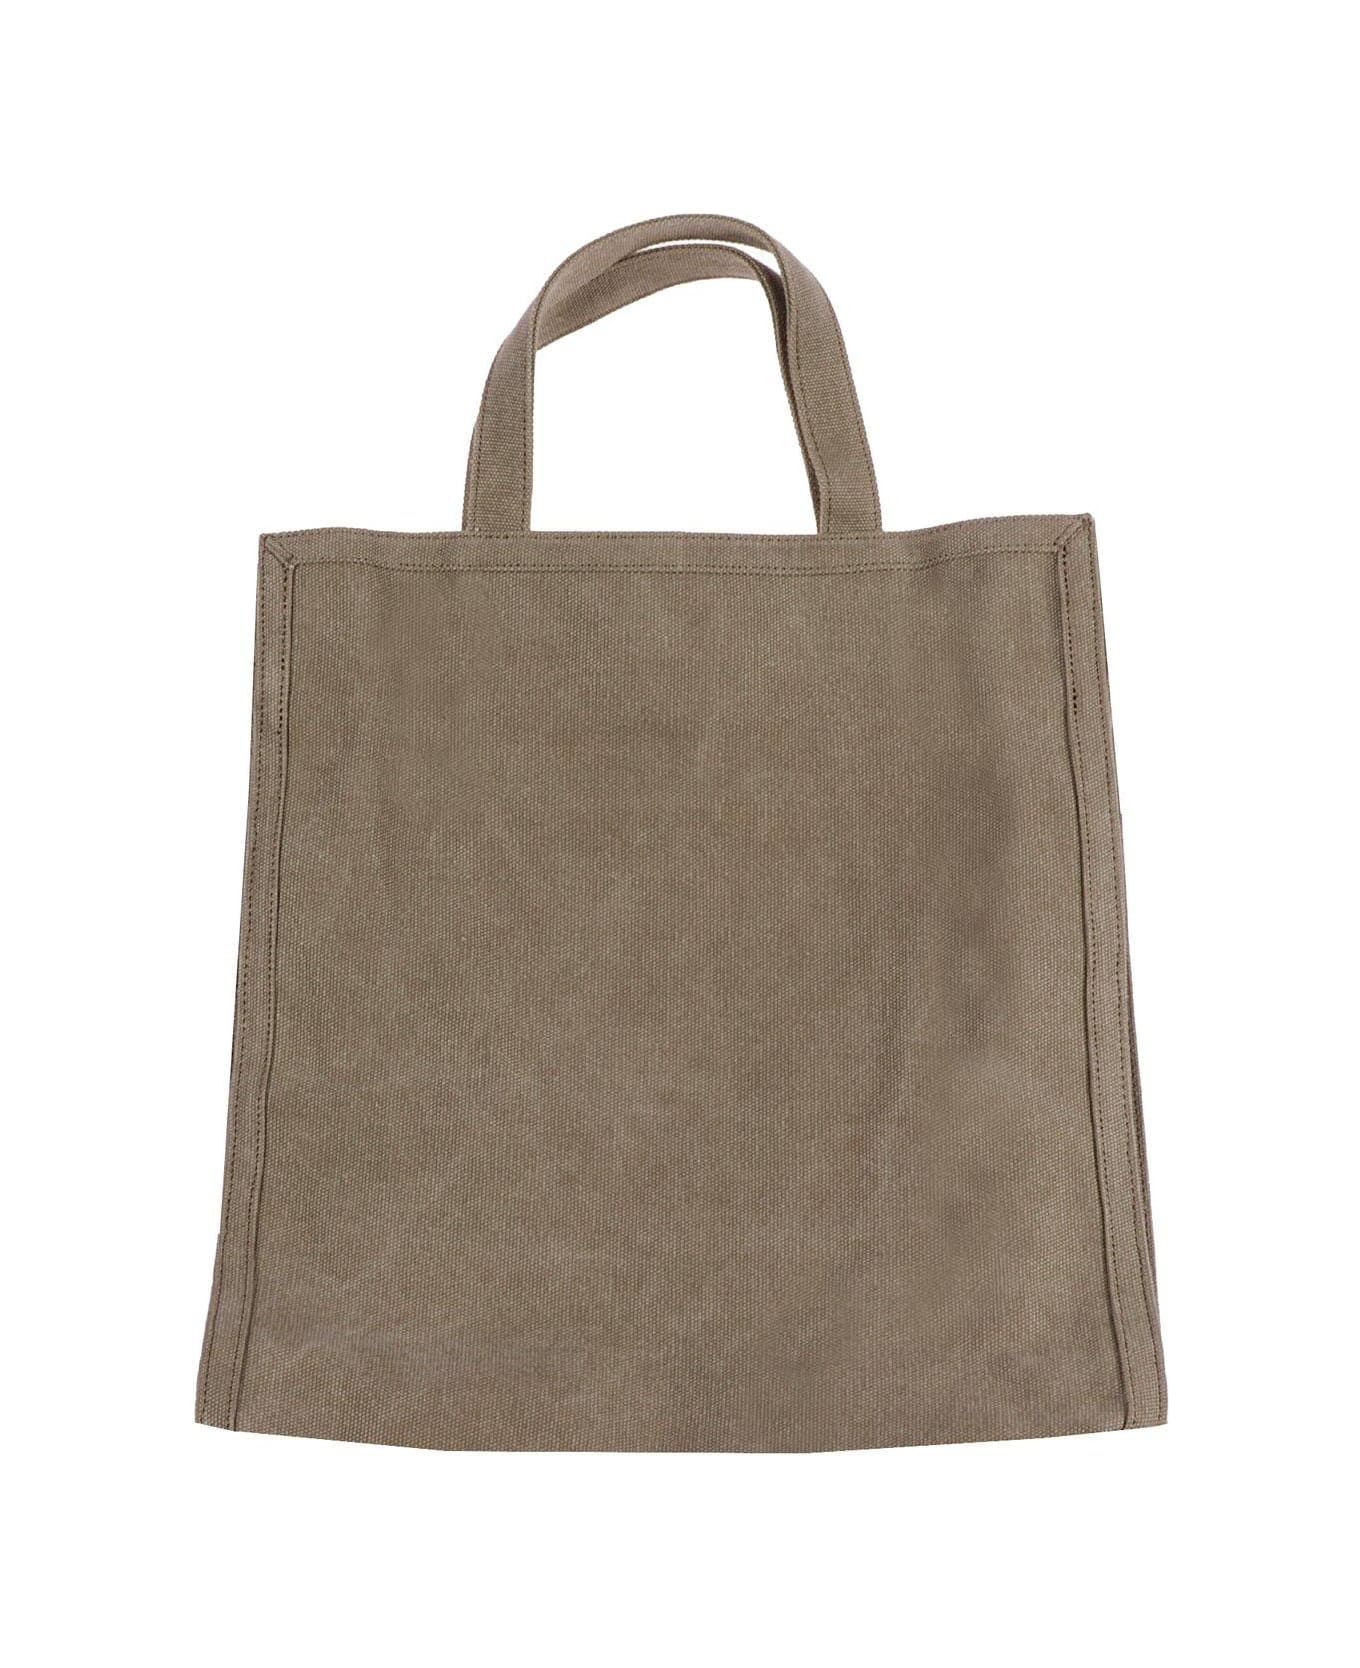 A.P.C. Recovery Shopping Tote Bag - Verde